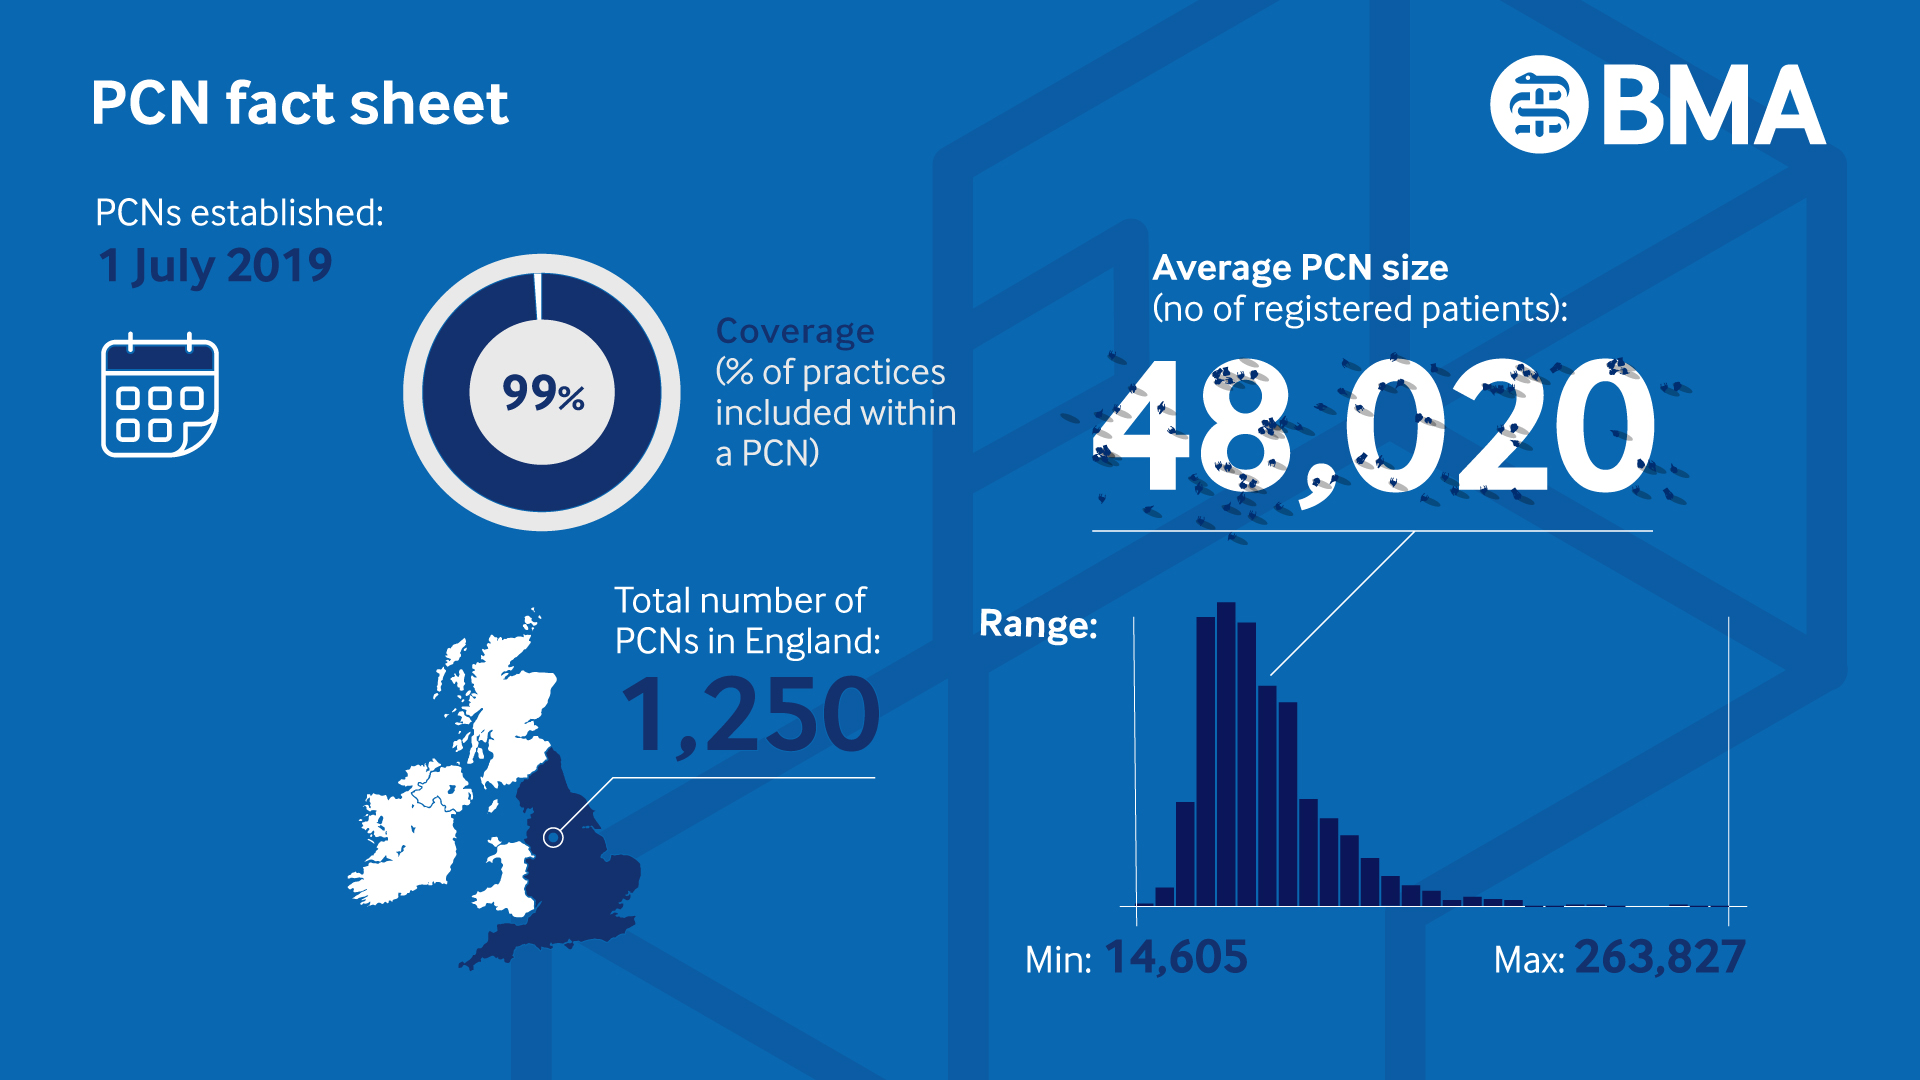 PCN factsheet - 99% of practices included in PCN, 1250 PCNs in England, 48020 average patients: min 14605 and max 263827